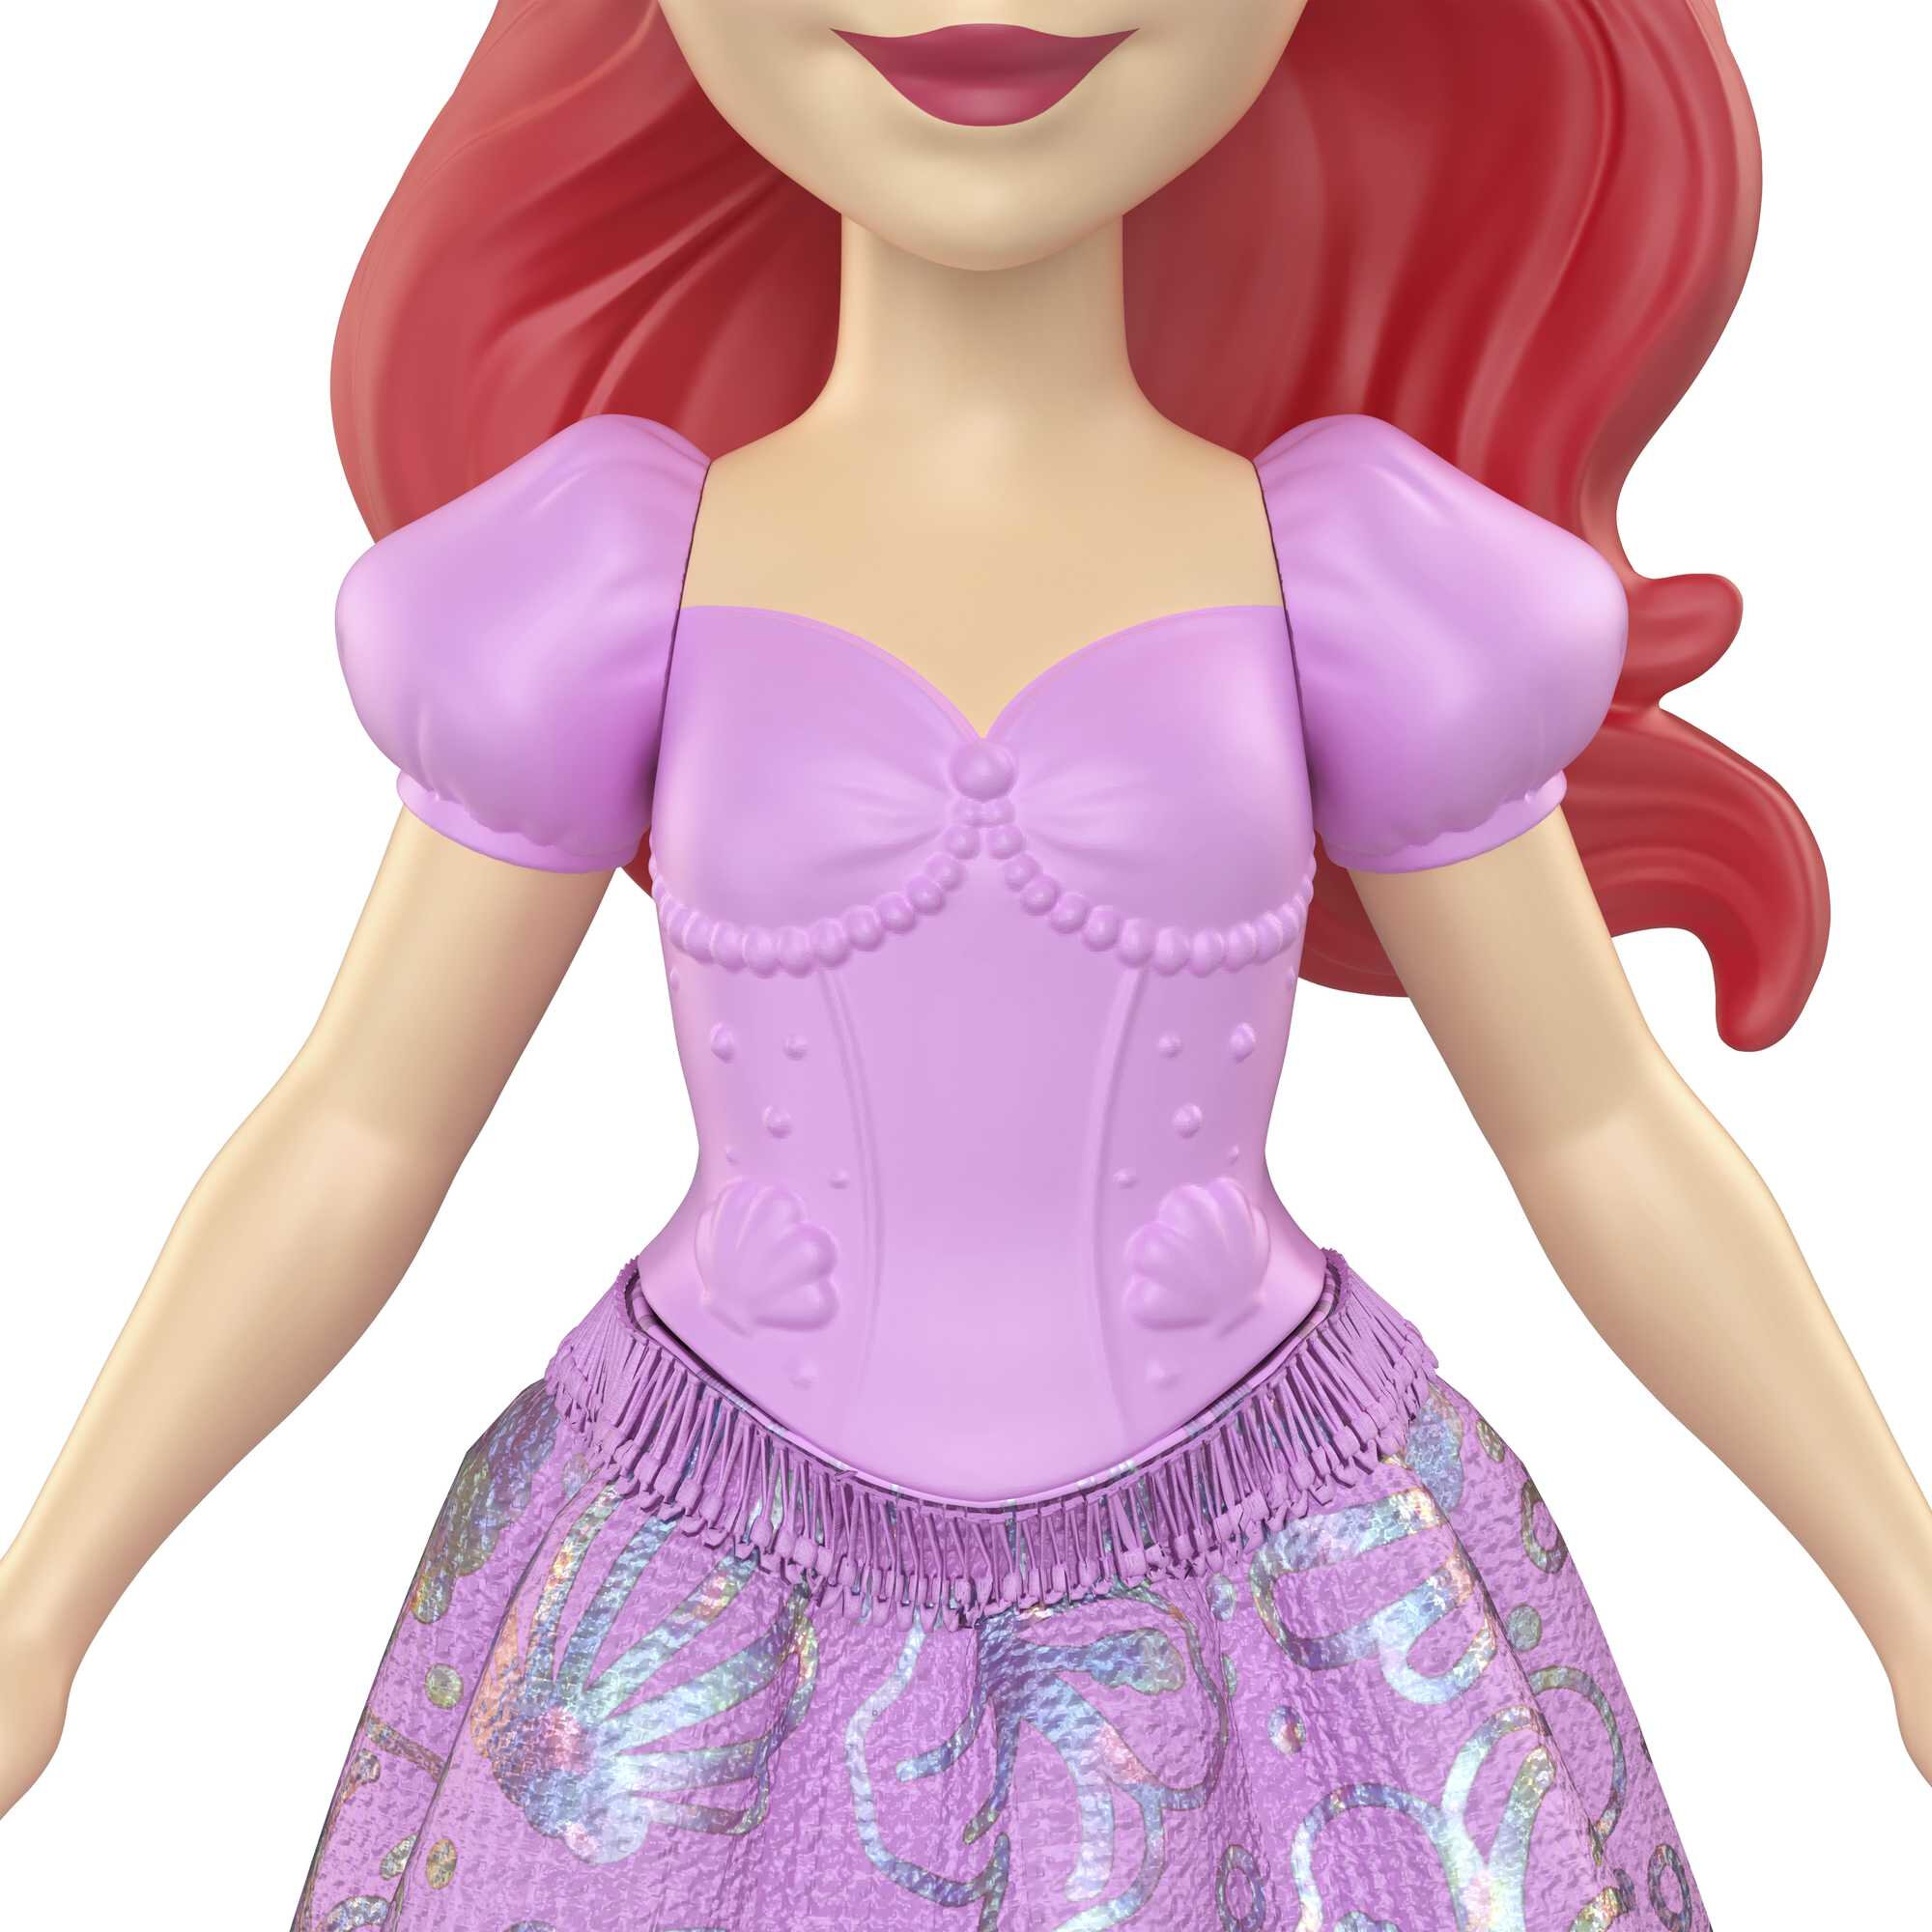 Disney Princess Ariel Small Doll, Red Hair & Blue Eyes, Signature Look with Pink Gown - image 5 of 6